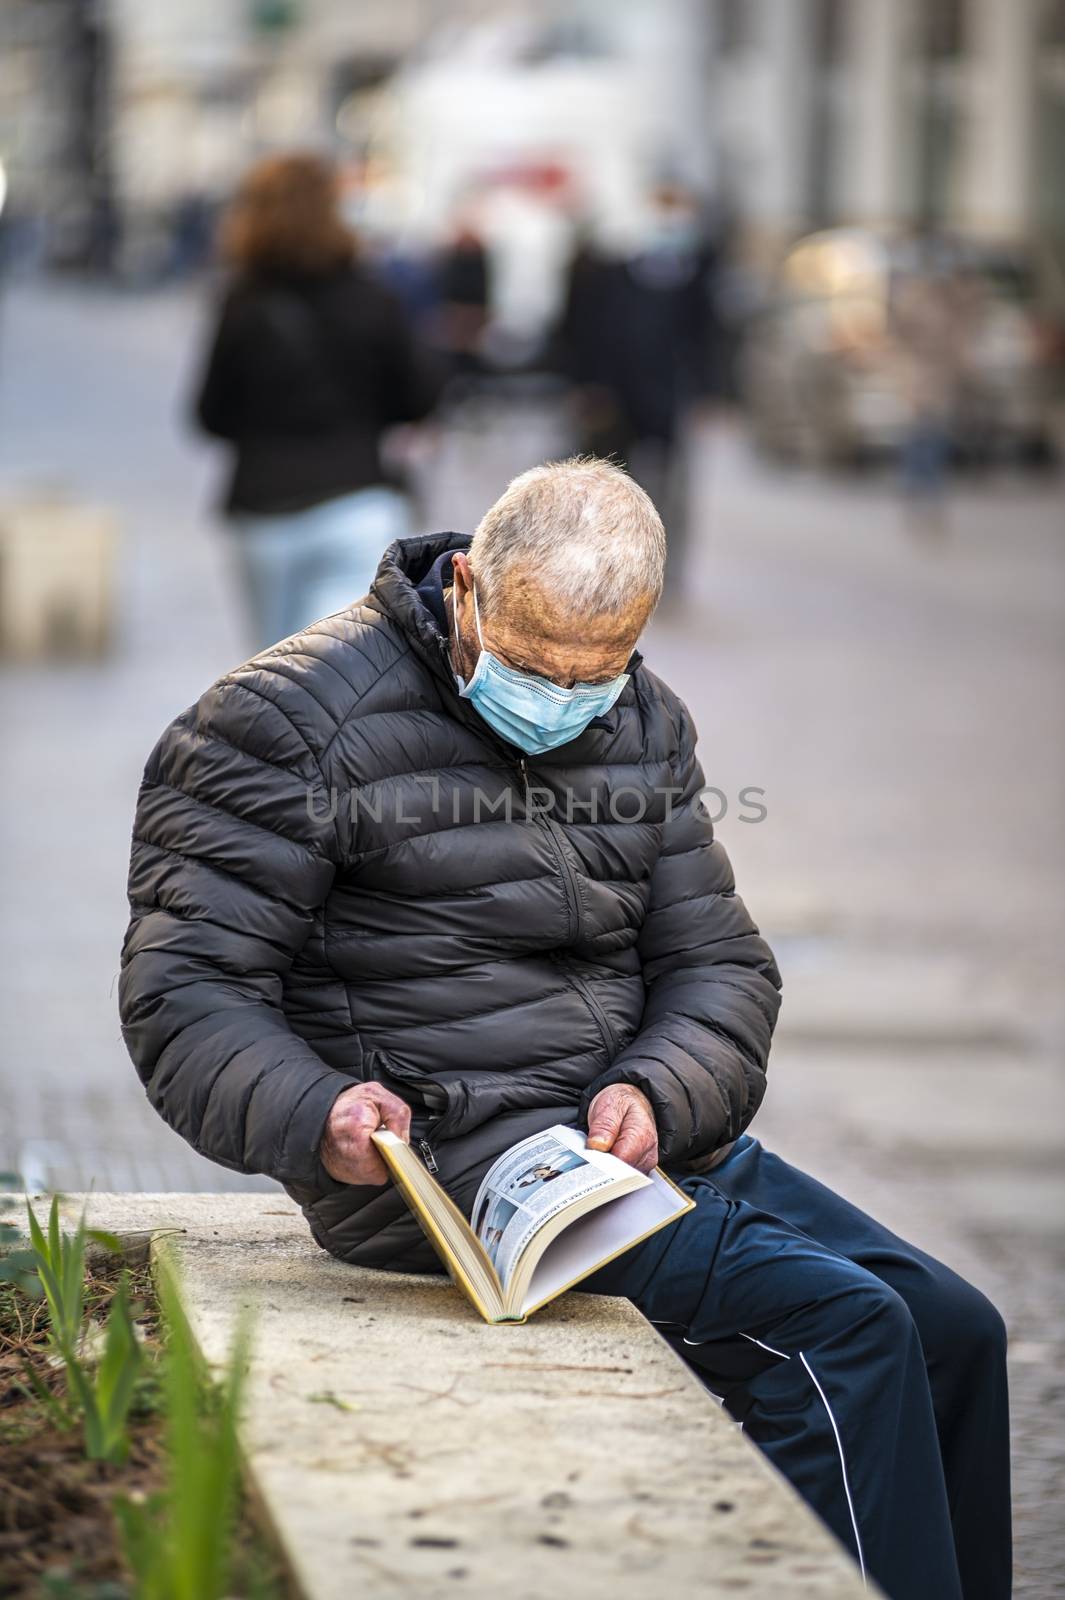 terni,italy november 19 2020:man with medical mask reads a book outdoors